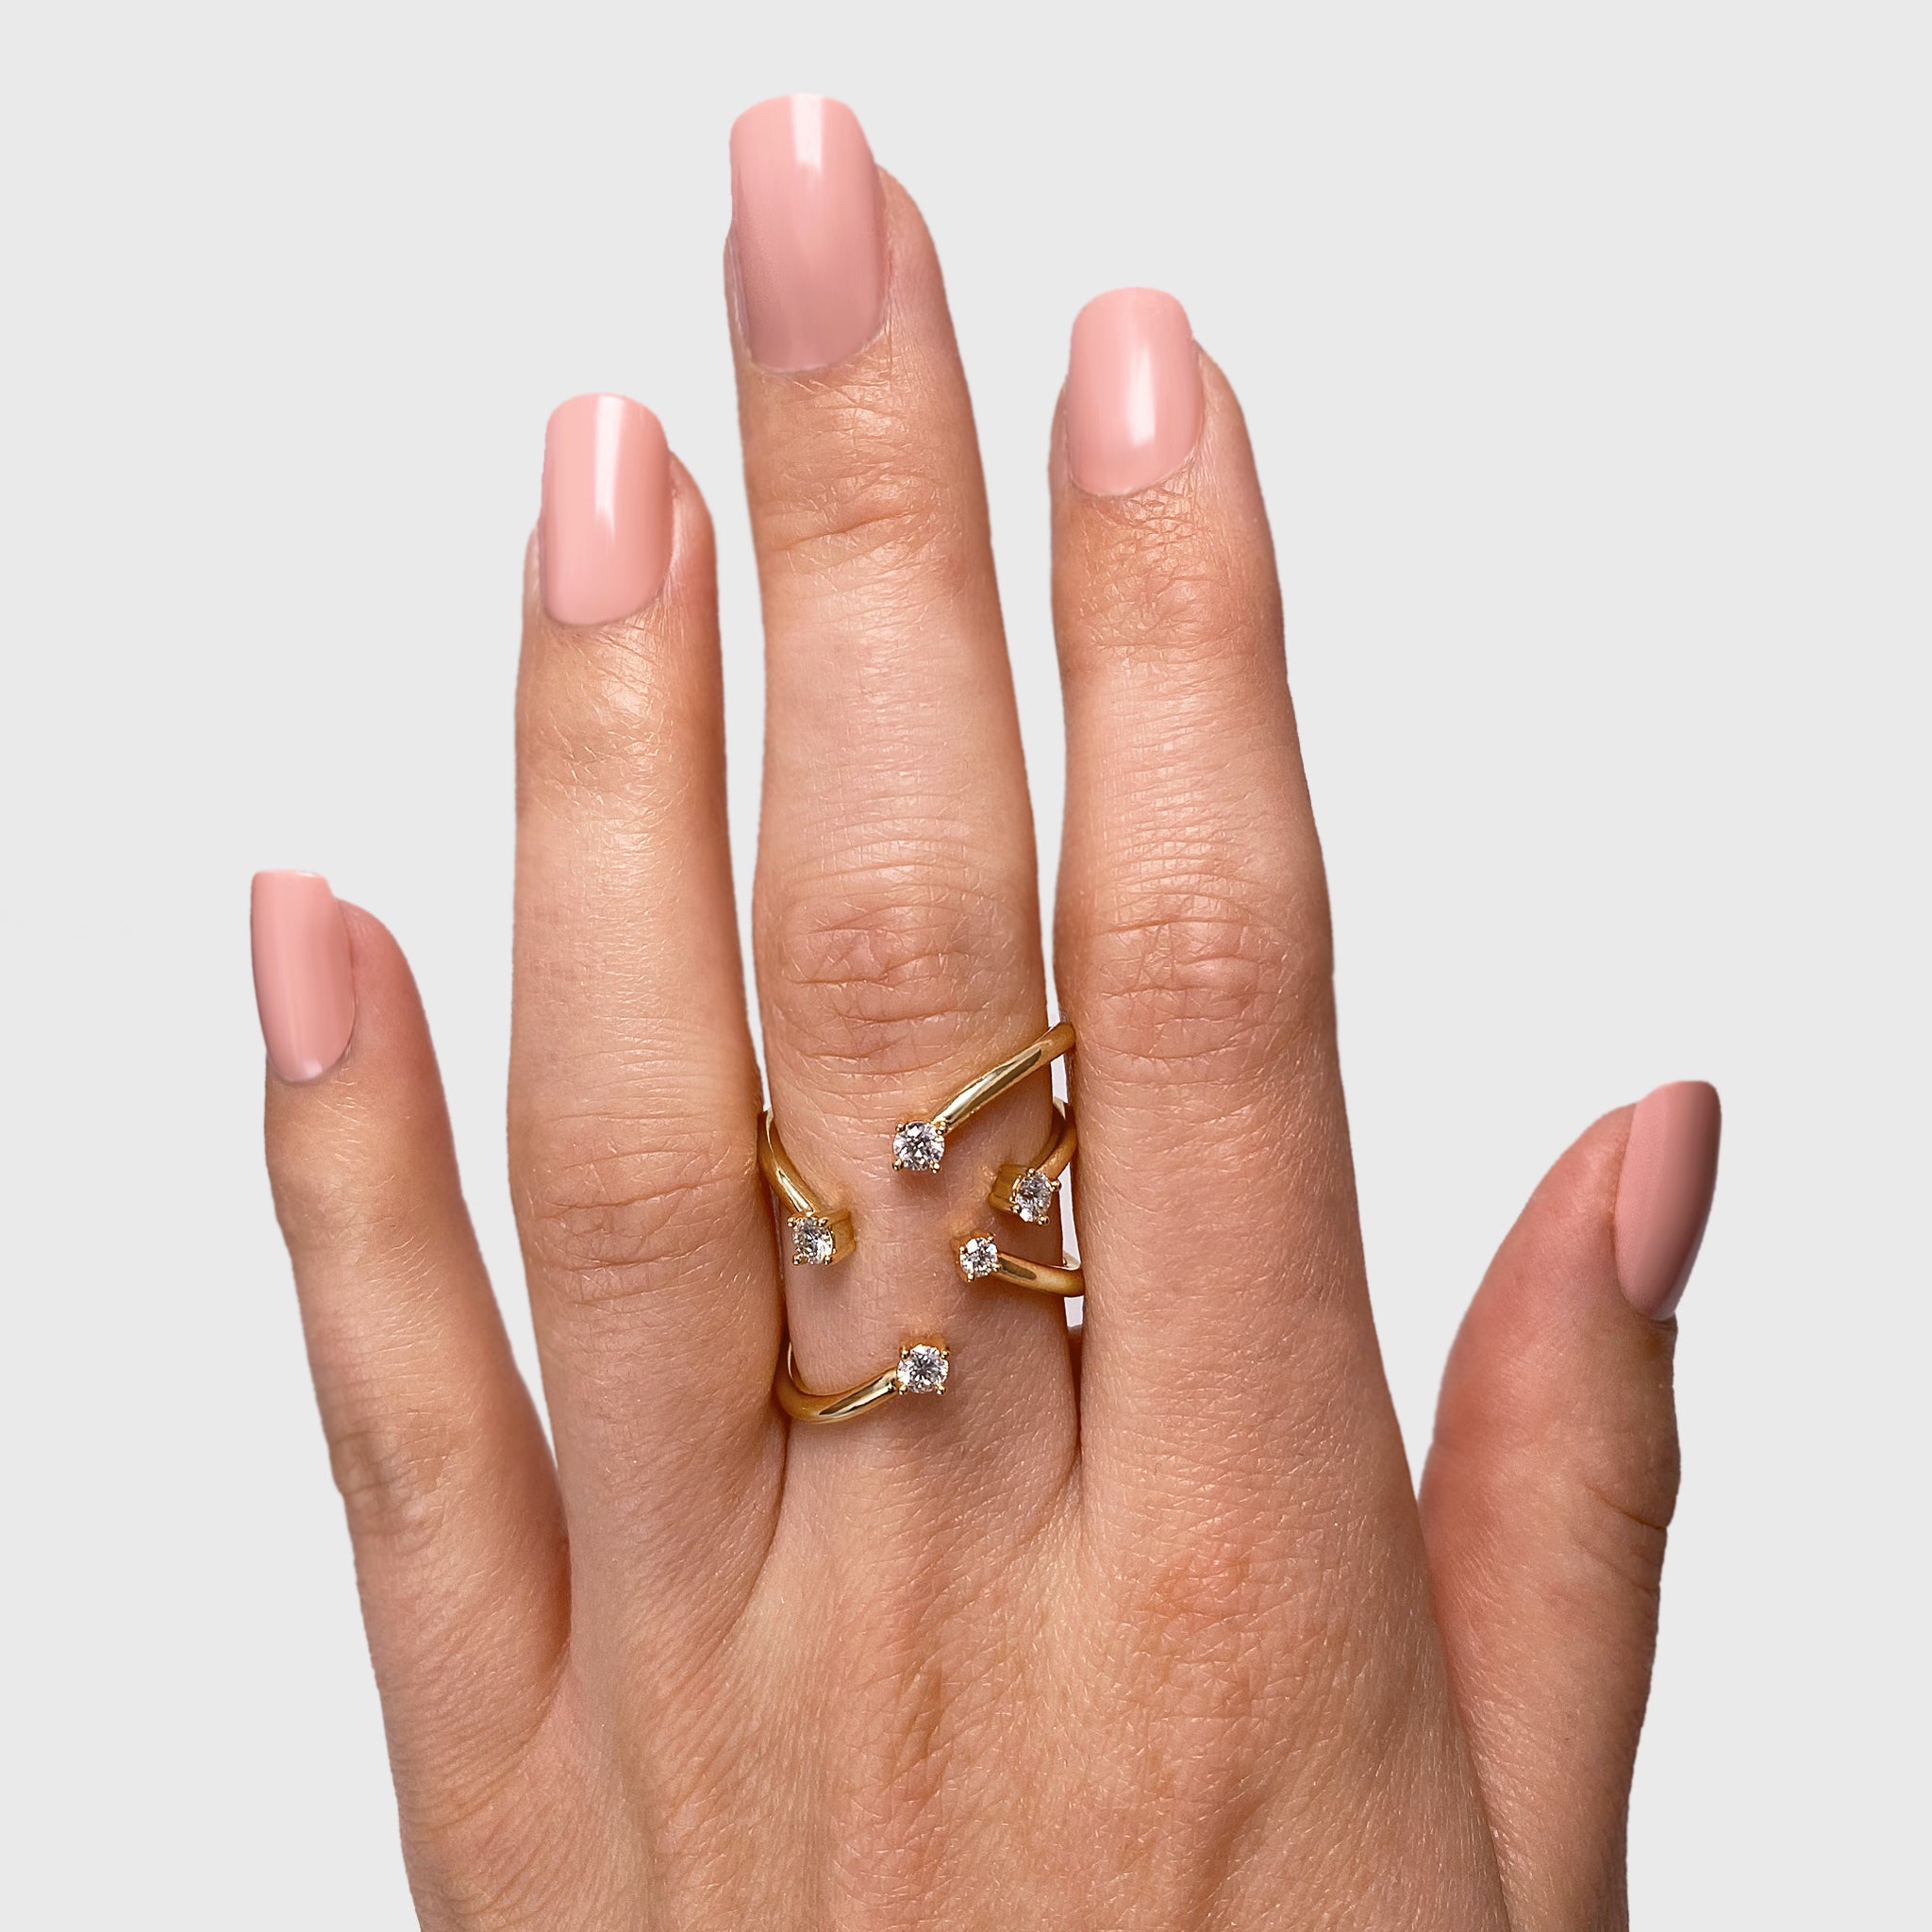 Shimansky - Women Wearing the Southern Cross Large Diamond Ring Crafted in 18K Yellow Gold